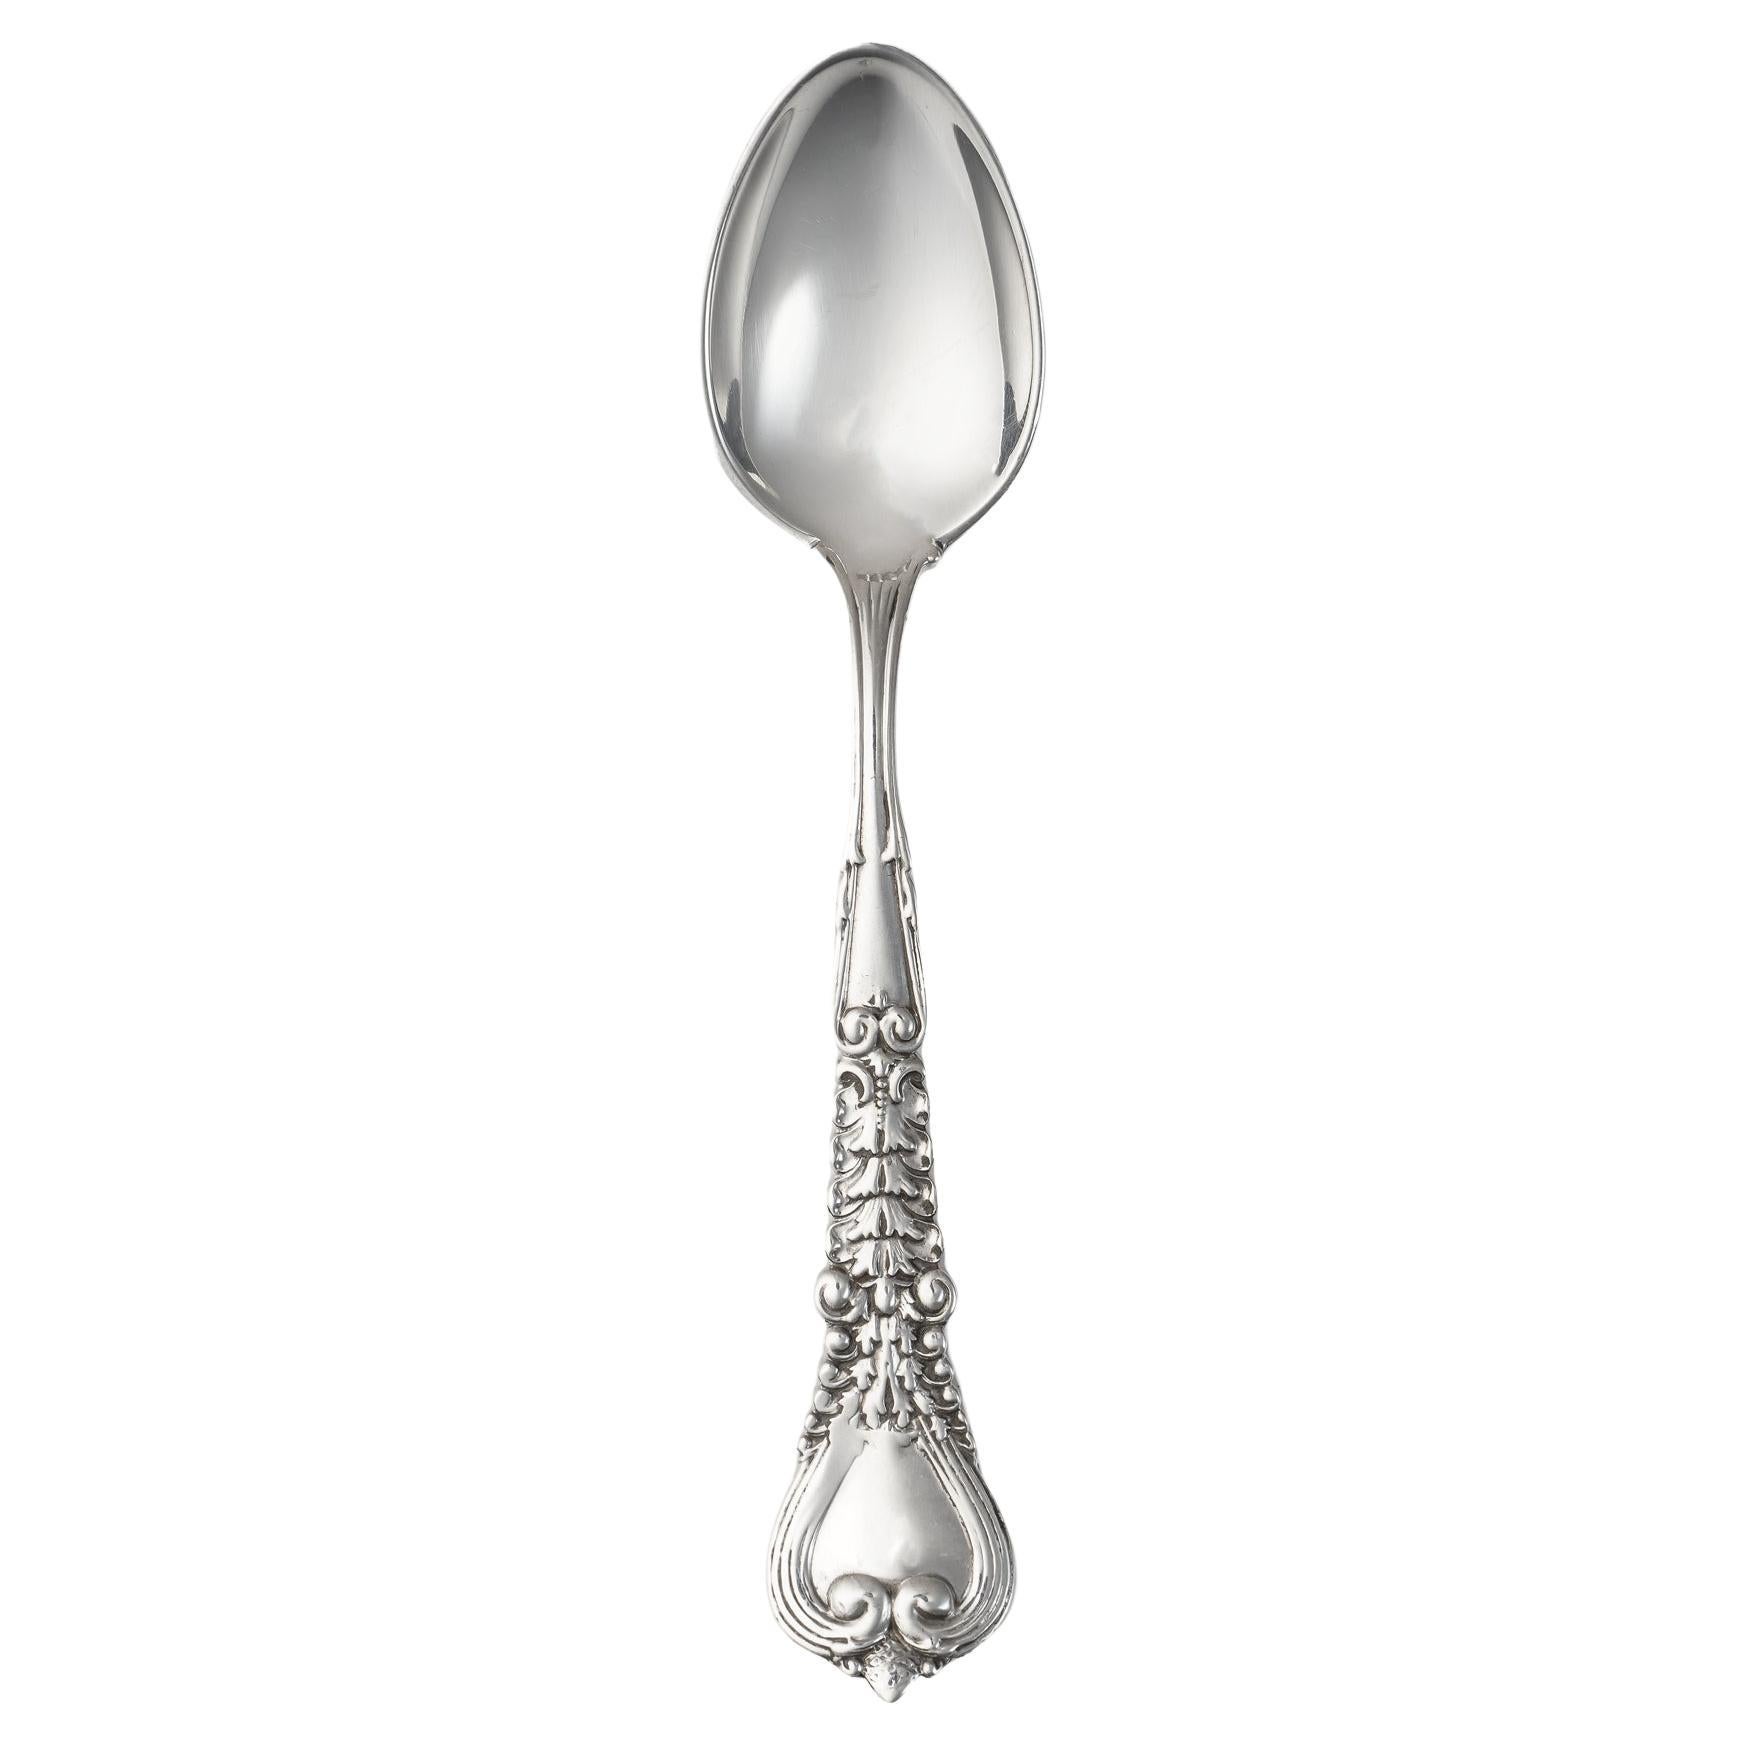 Antique Tiffany & Co. Sterling Silver Florentine Pattern Demitasse Spoon For Sale